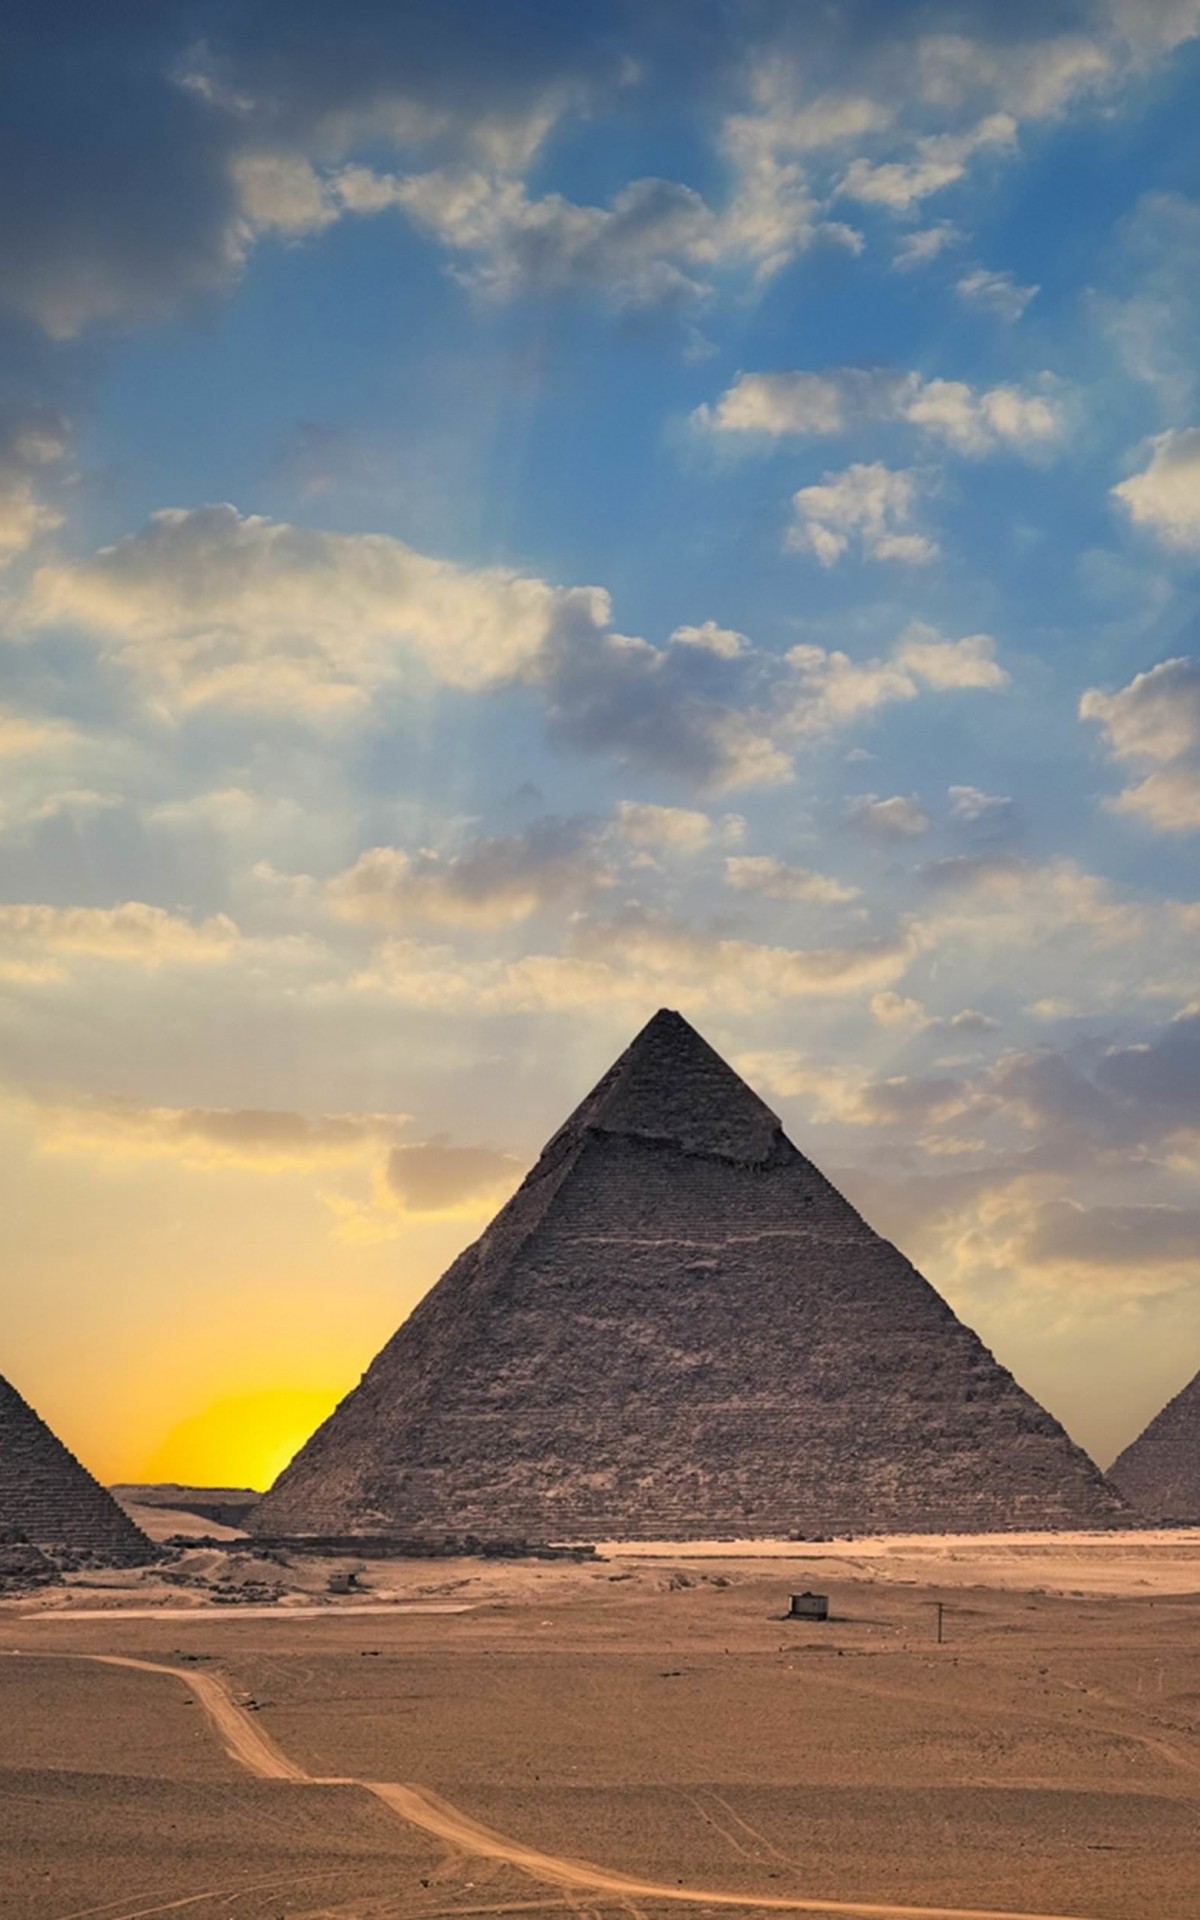 The Great Pyramids of Giza Wallpaper for Amazon Kindle Fire HDX